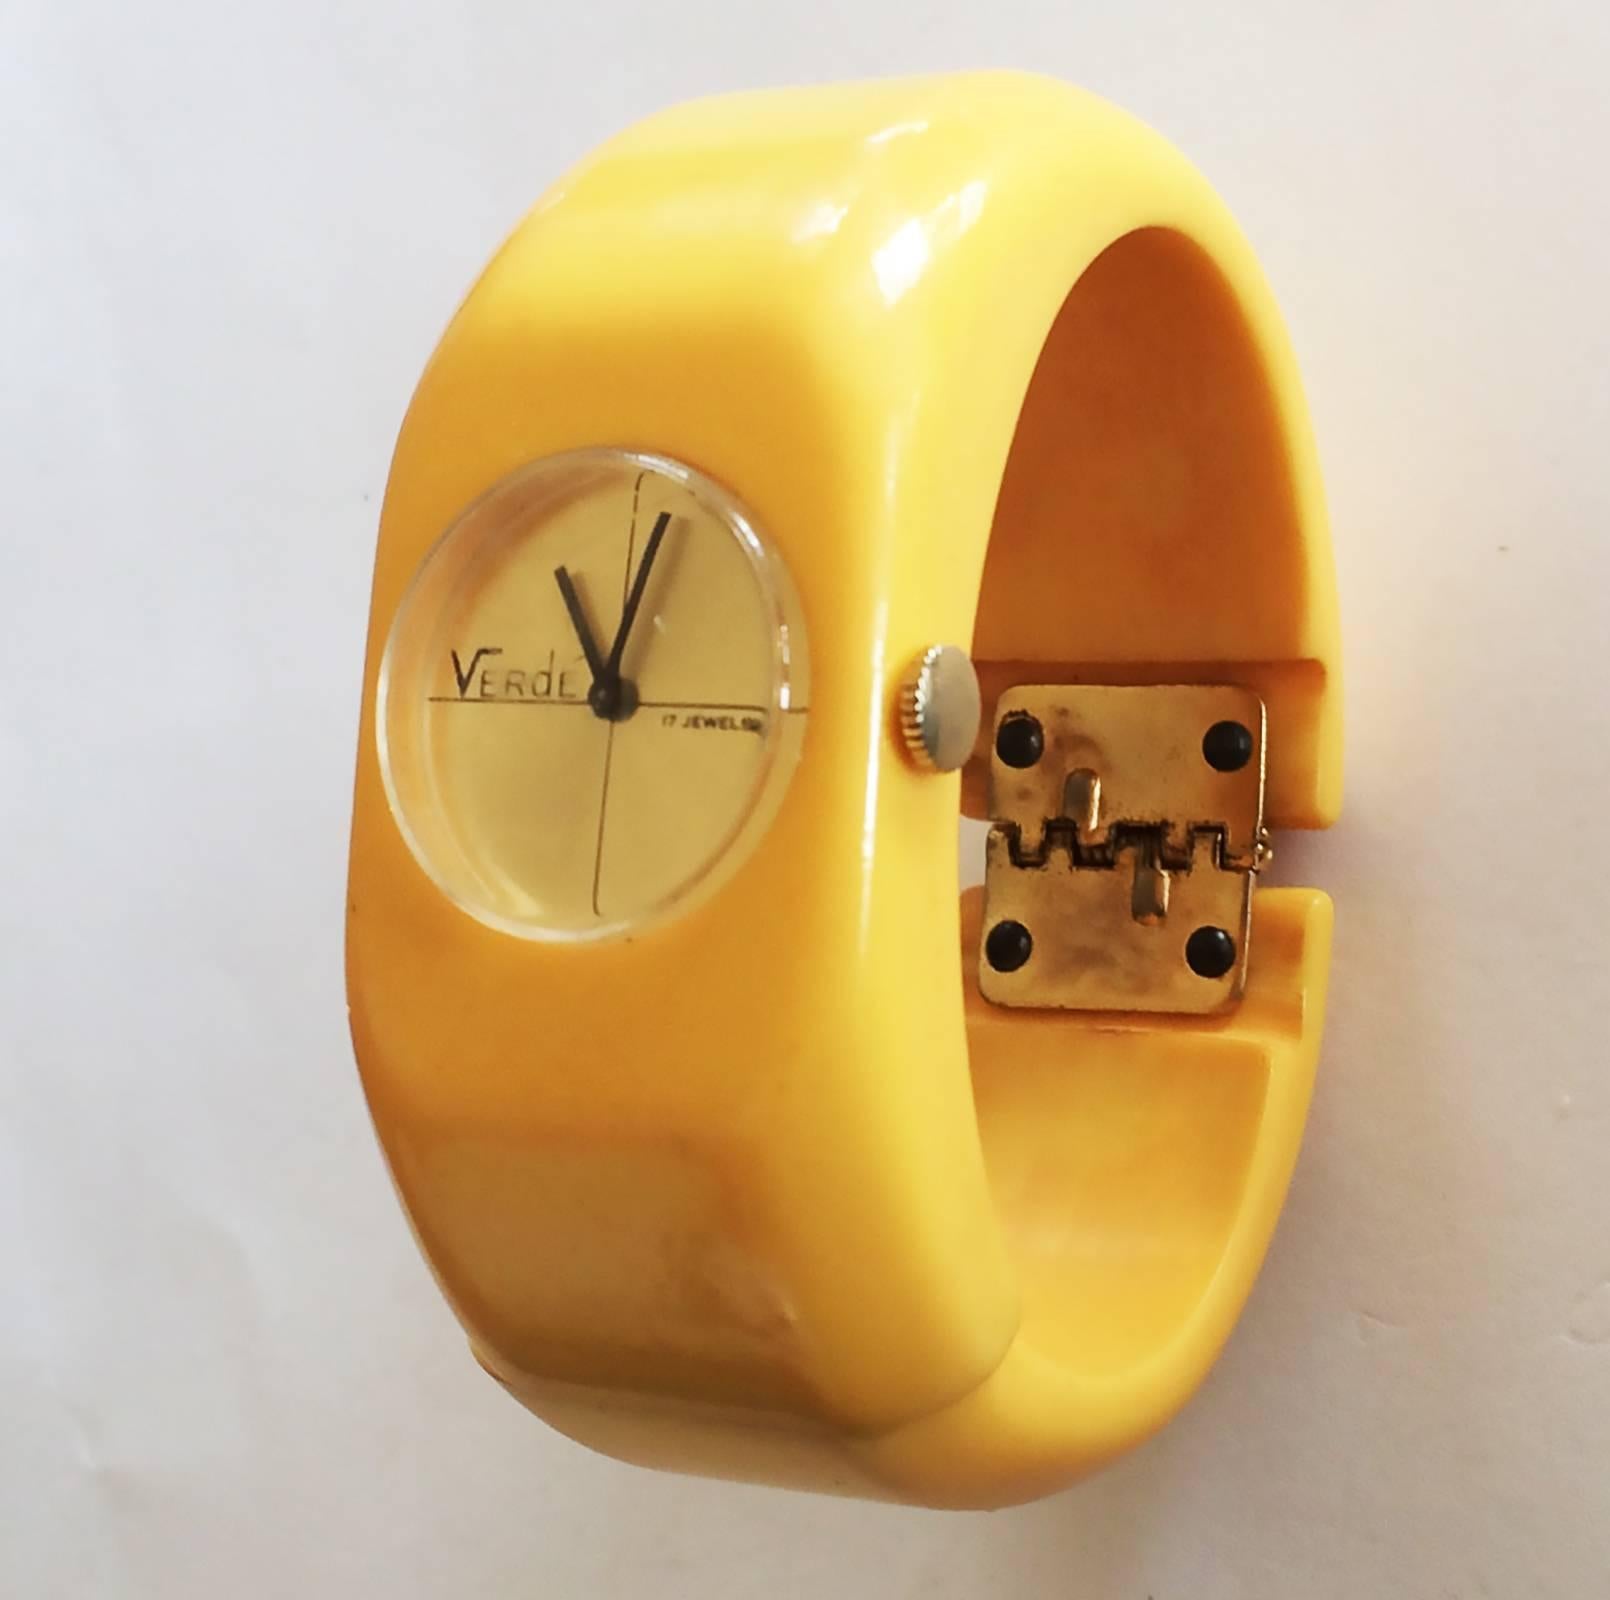 Art Deco  Wrist Watch, Corn yellow Bakelite, all original in great condition for age. Overall excellent condition, mechanical wind-up, keeping good time. The front crystal has a couple of minor scuffs, but the gilt face is perfect, simply divided